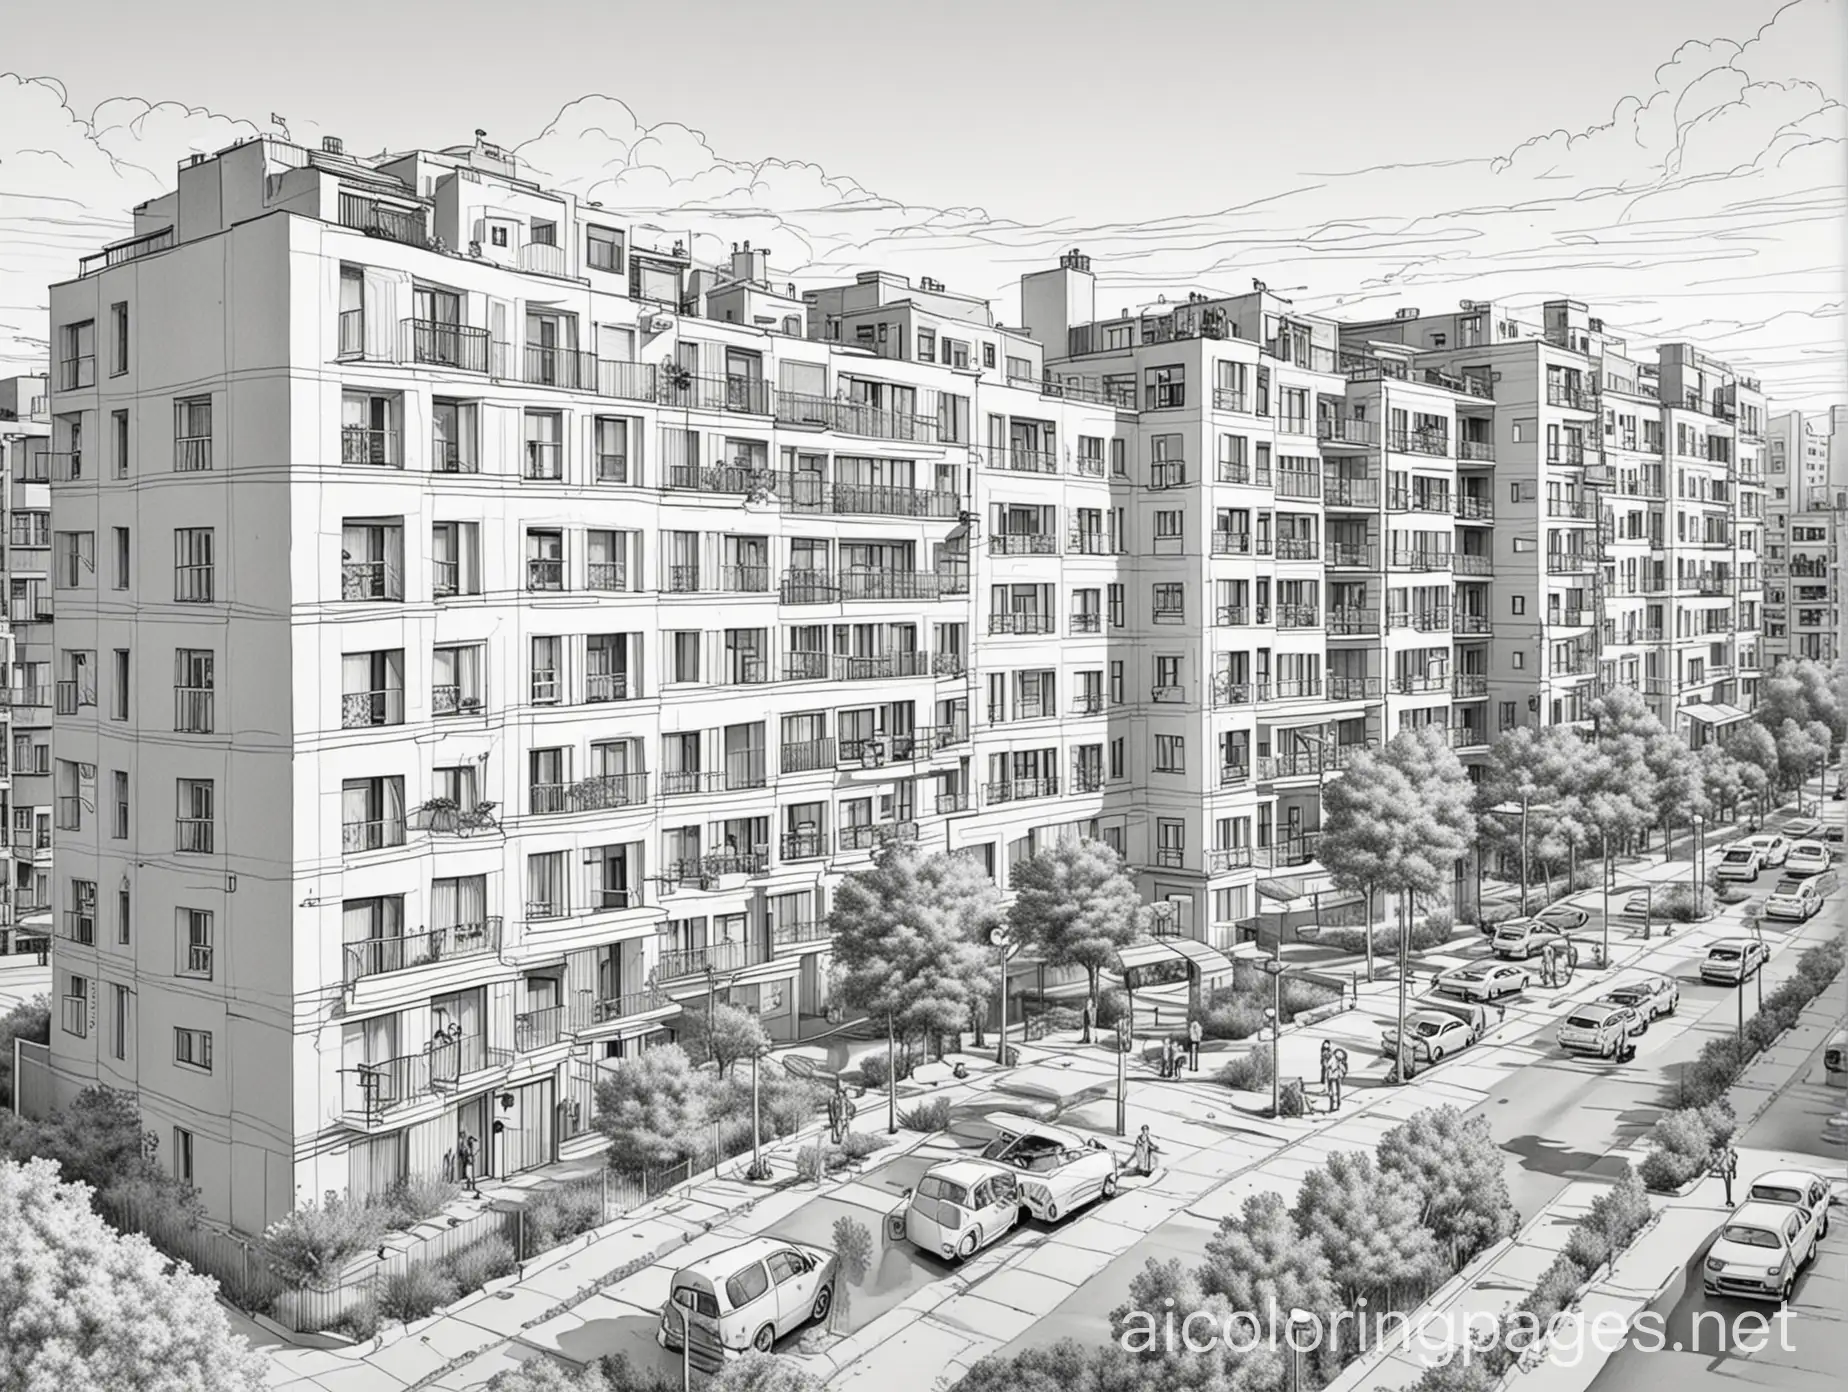 Generate a cartoon style black and white image of a large apartment complex with multiple buildings, landscapes and people to create a realistic and immersive scene. Show the complex from a distant viewpoint, capturing the entire complex in the frame. Add several people engaging in various activities within the apartment complex grounds. Ensure they are clearly visible but not the primary focus of the image. , Coloring Page, black and white, line art, white background, Simplicity, Ample White Space. The background of the coloring page is plain white to make it easy for young children to color within the lines. The outlines of all the subjects are easy to distinguish, making it simple for kids to color without too much difficulty